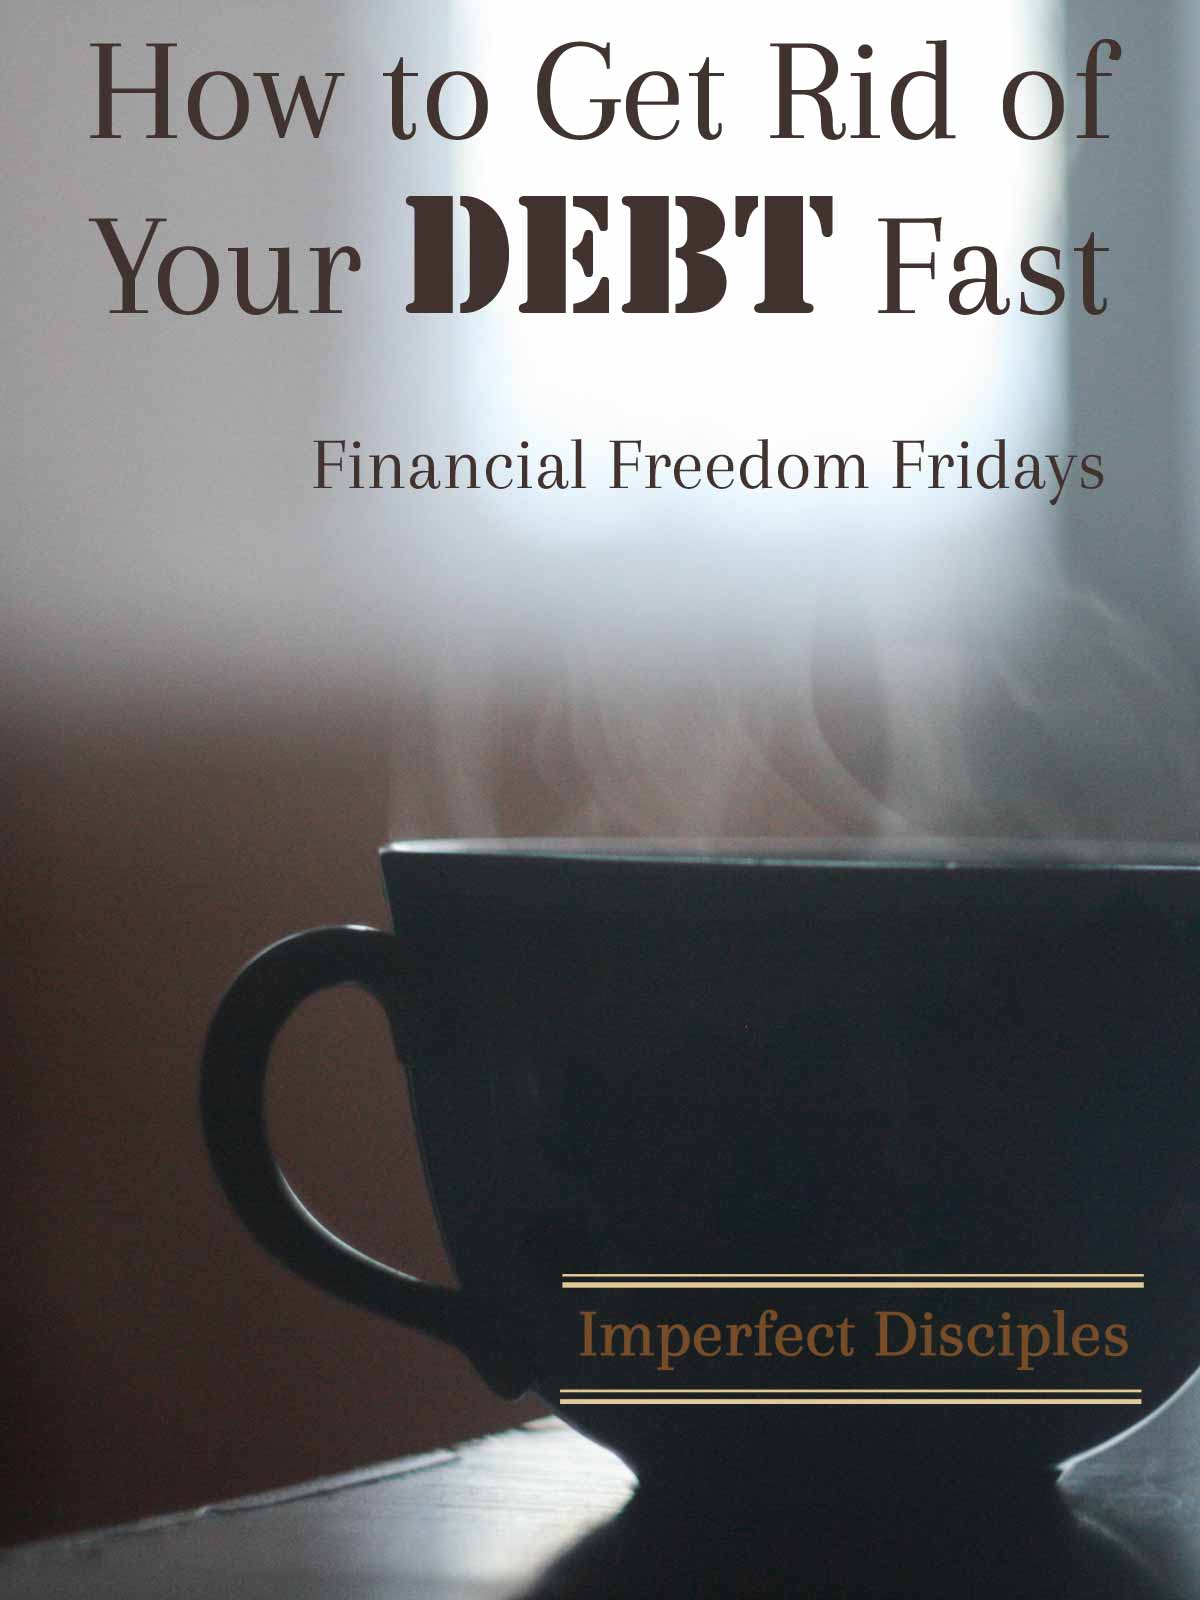 How to get rid of your debt fast - financial freedom fridays